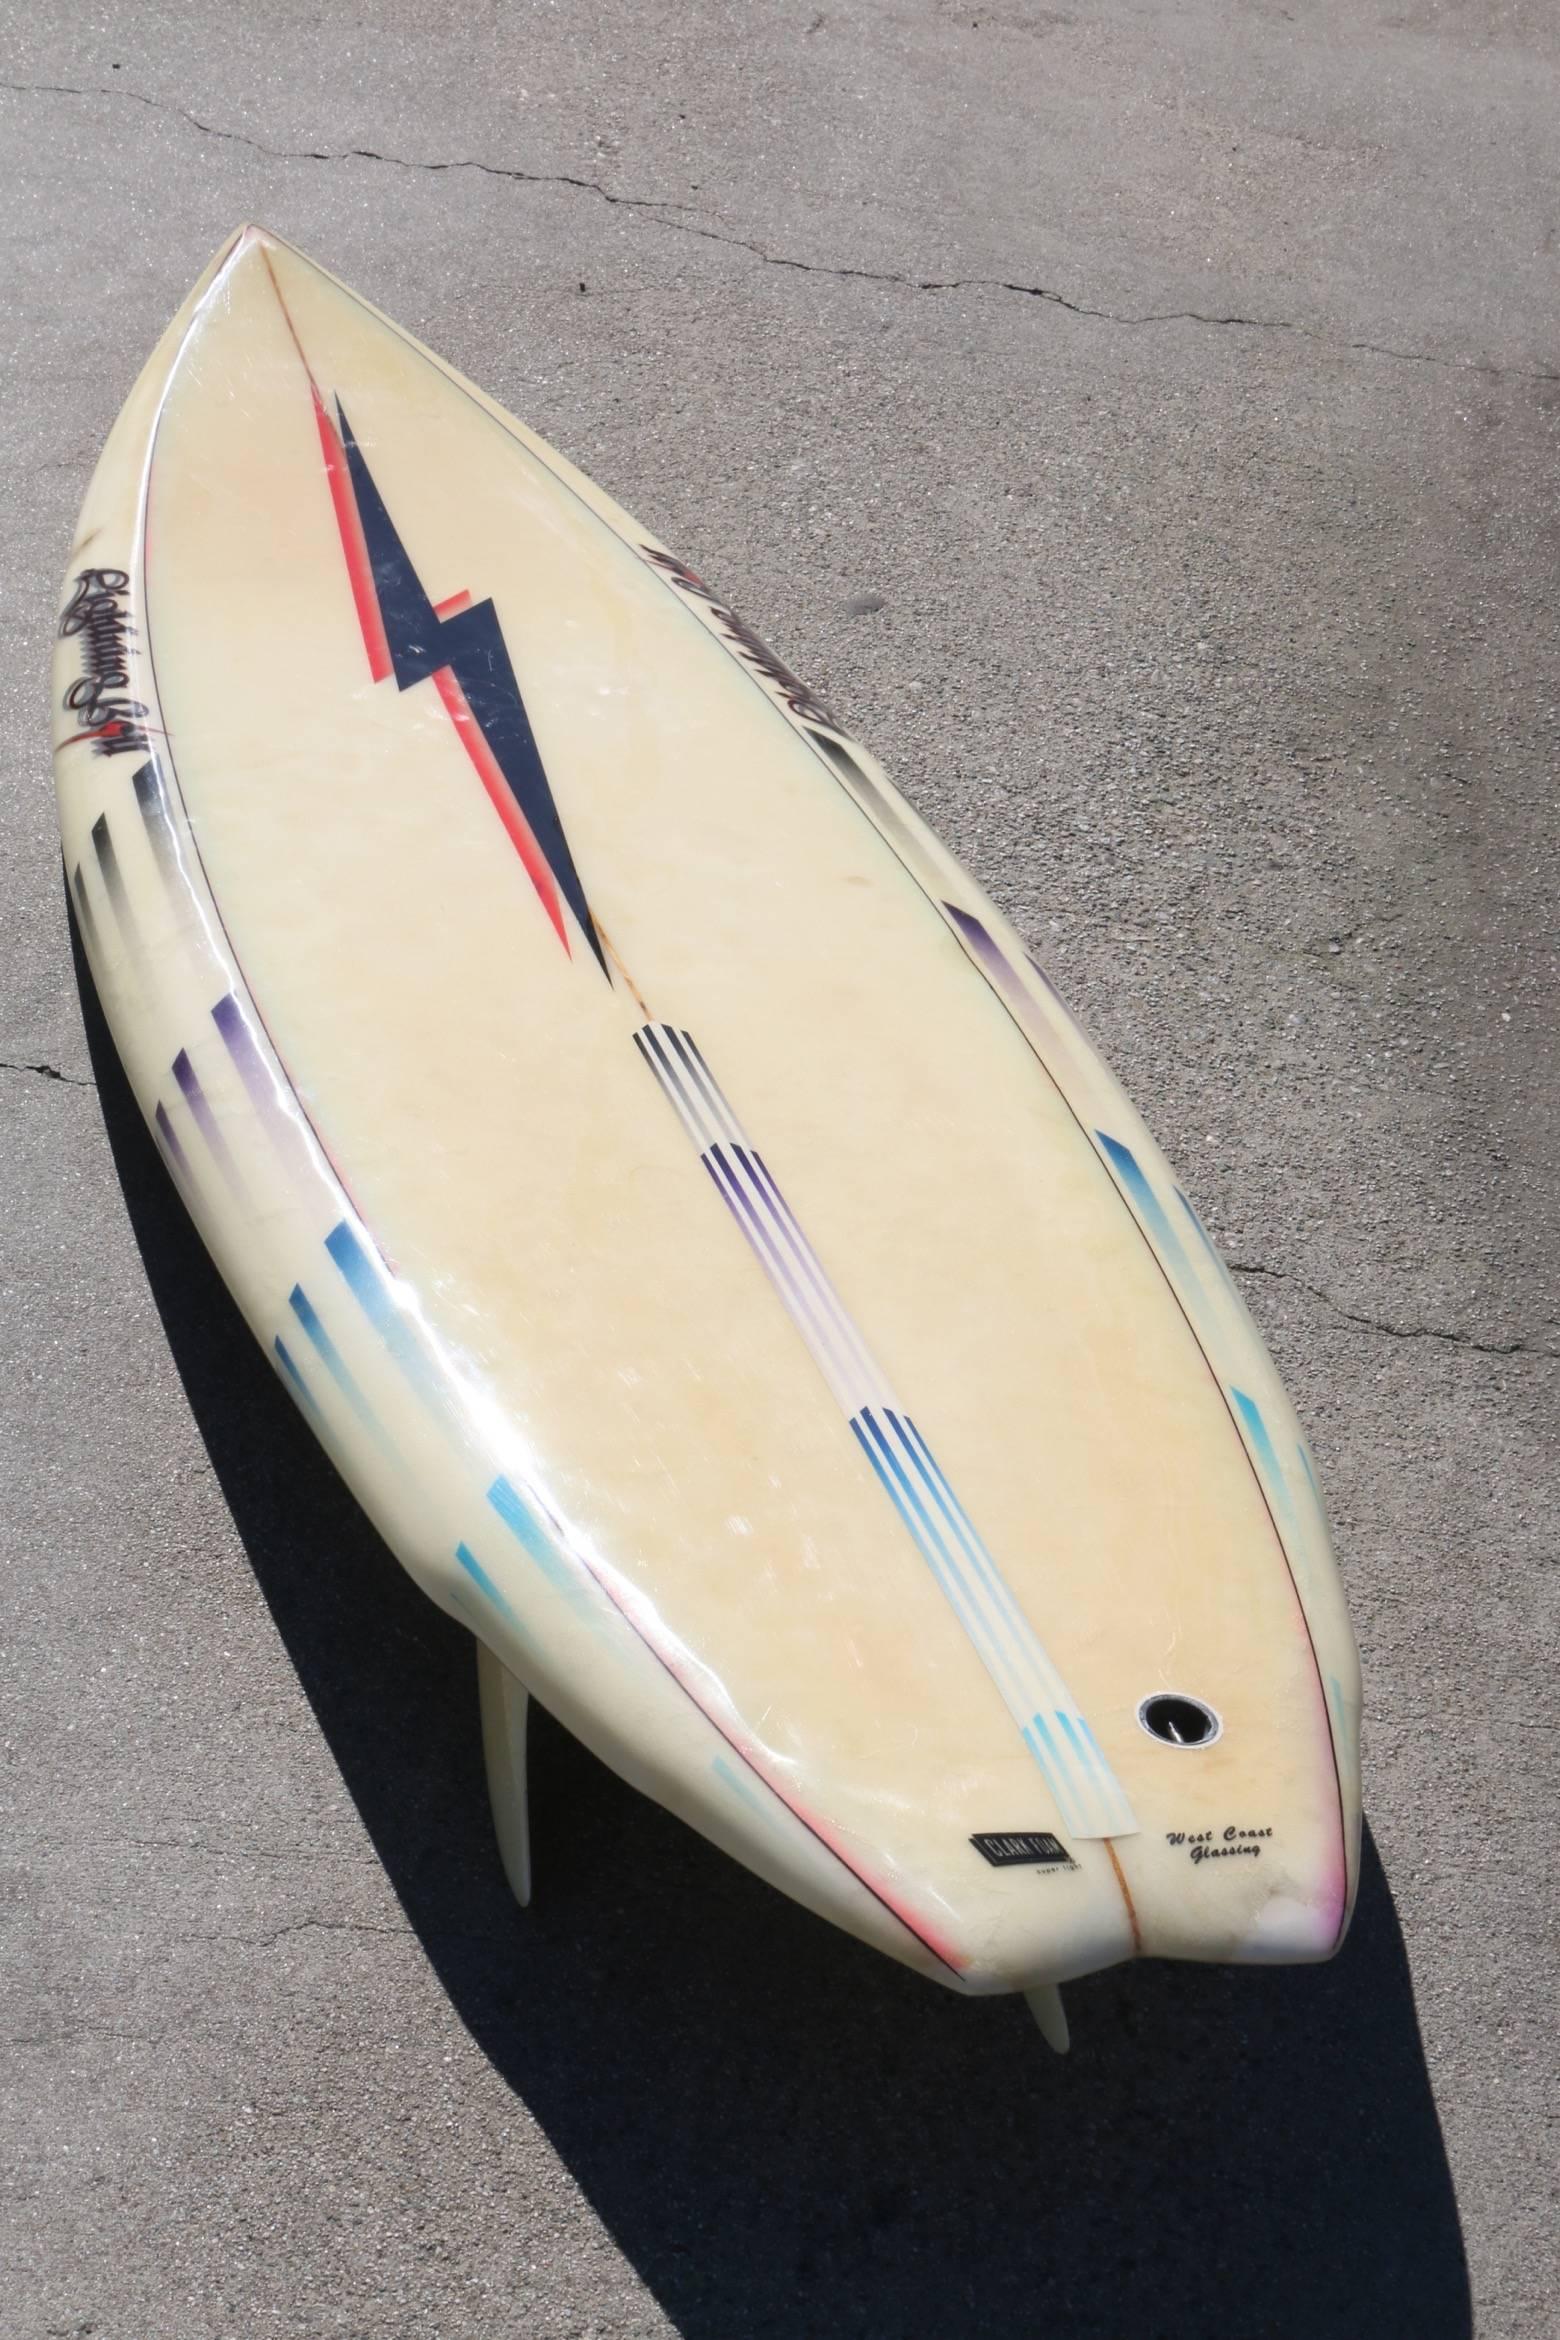 This lightning bolt surfboard with Black and Red Bolt has four lightning bolt logos, as well as one Clark Foam and one West Coast Glassing logo. Made in the 1980s it is a double wing swallow tail design and has three fins with the centre fin